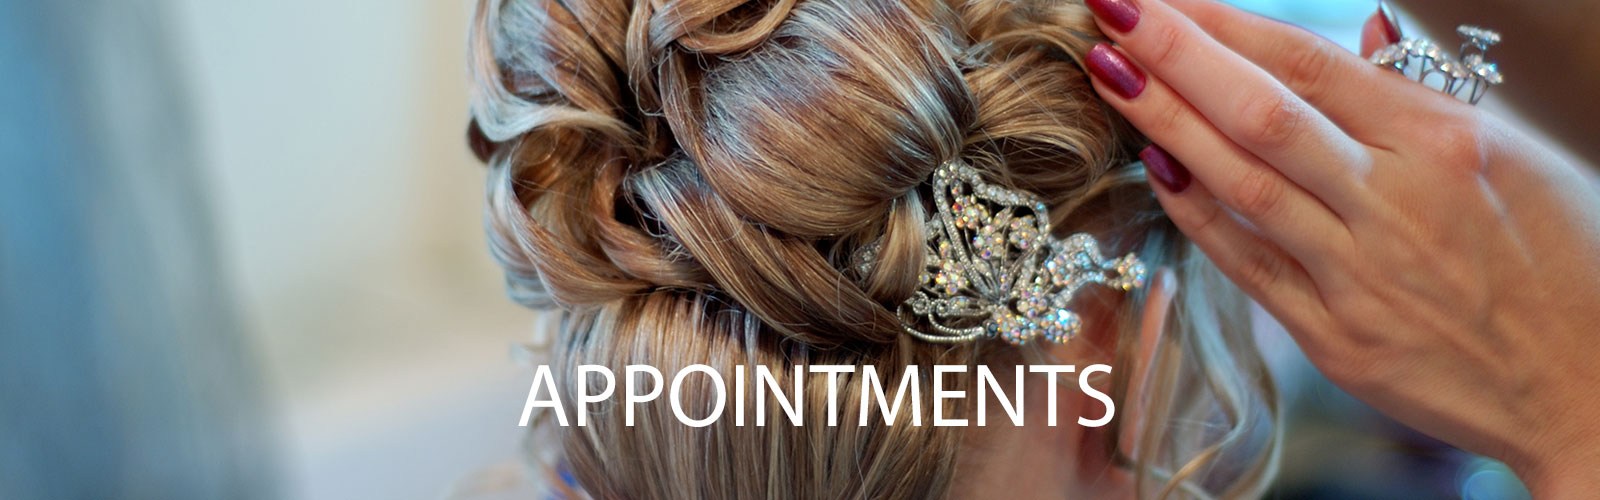 header-appointments-2024.jpg